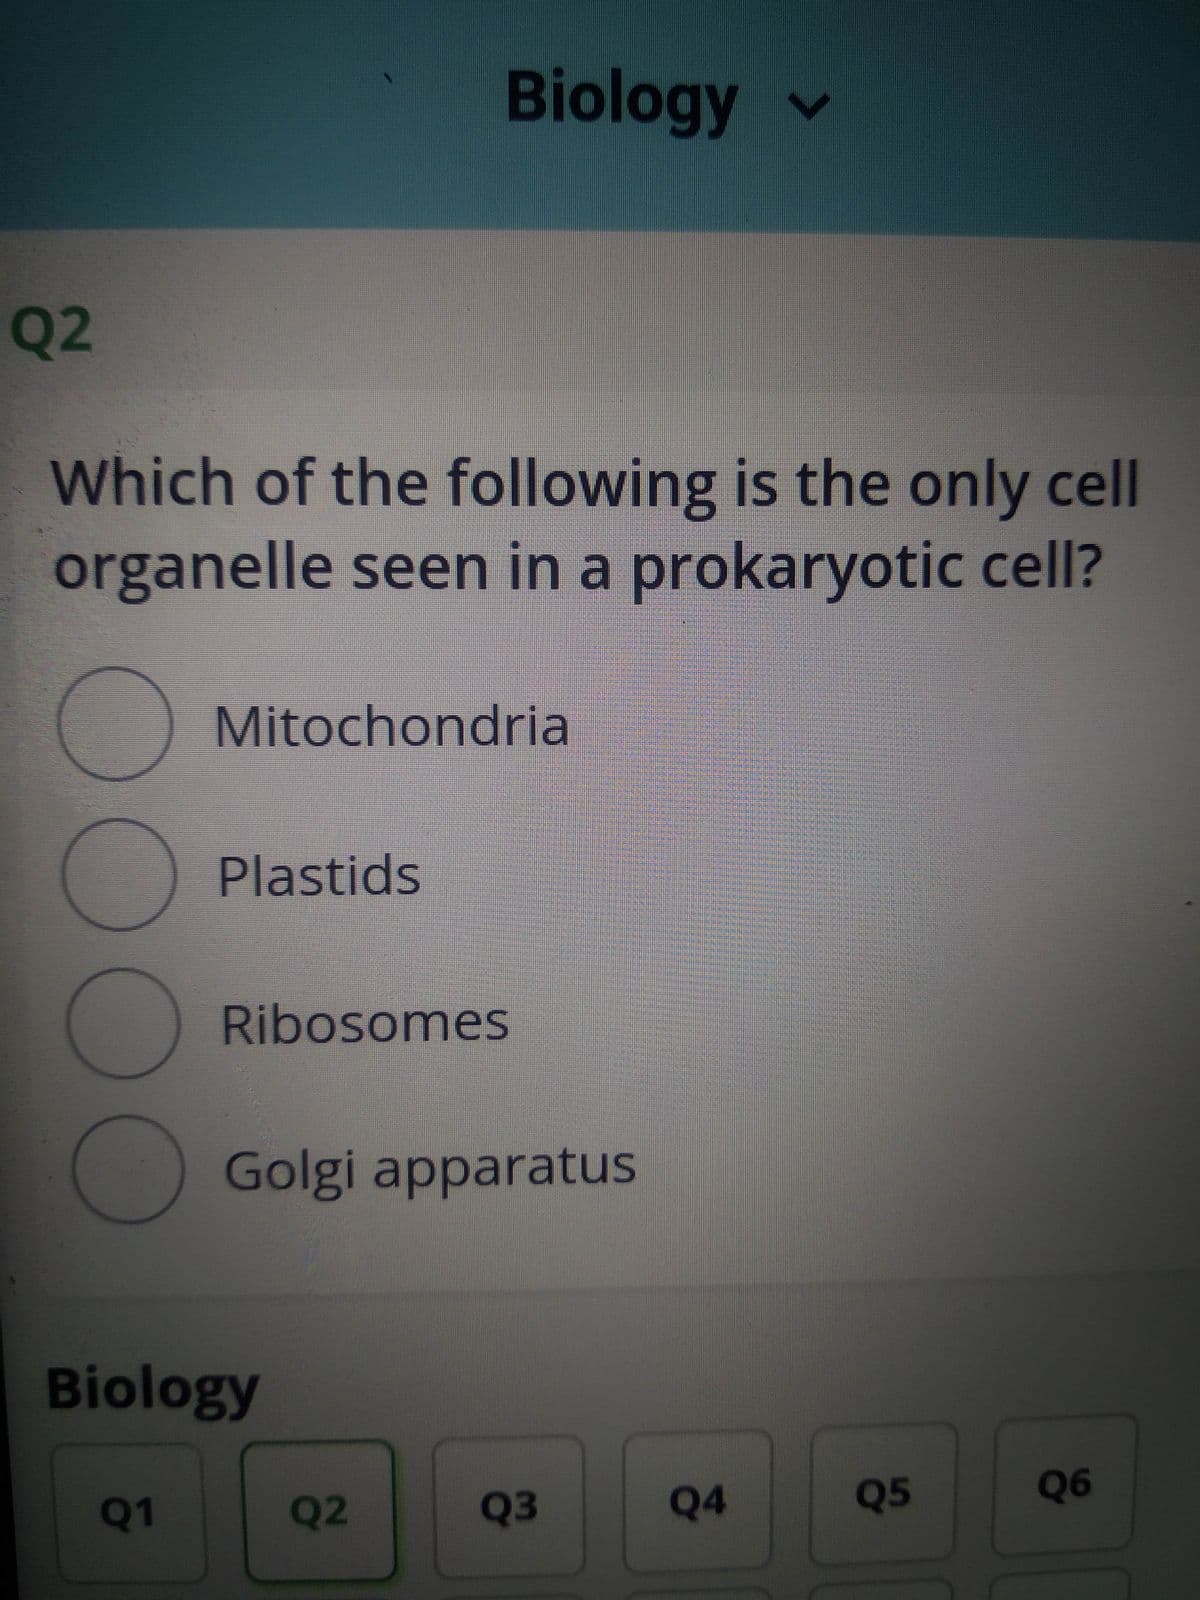 Biology v
Q2
Which of the following is the only cell
organelle seen in a prokaryotic cell?
Mitochondria
Plastids
Ribosomes
Golgi apparatus
Biology
Q1
Q2
Q3
Q4
Q5
Q6
